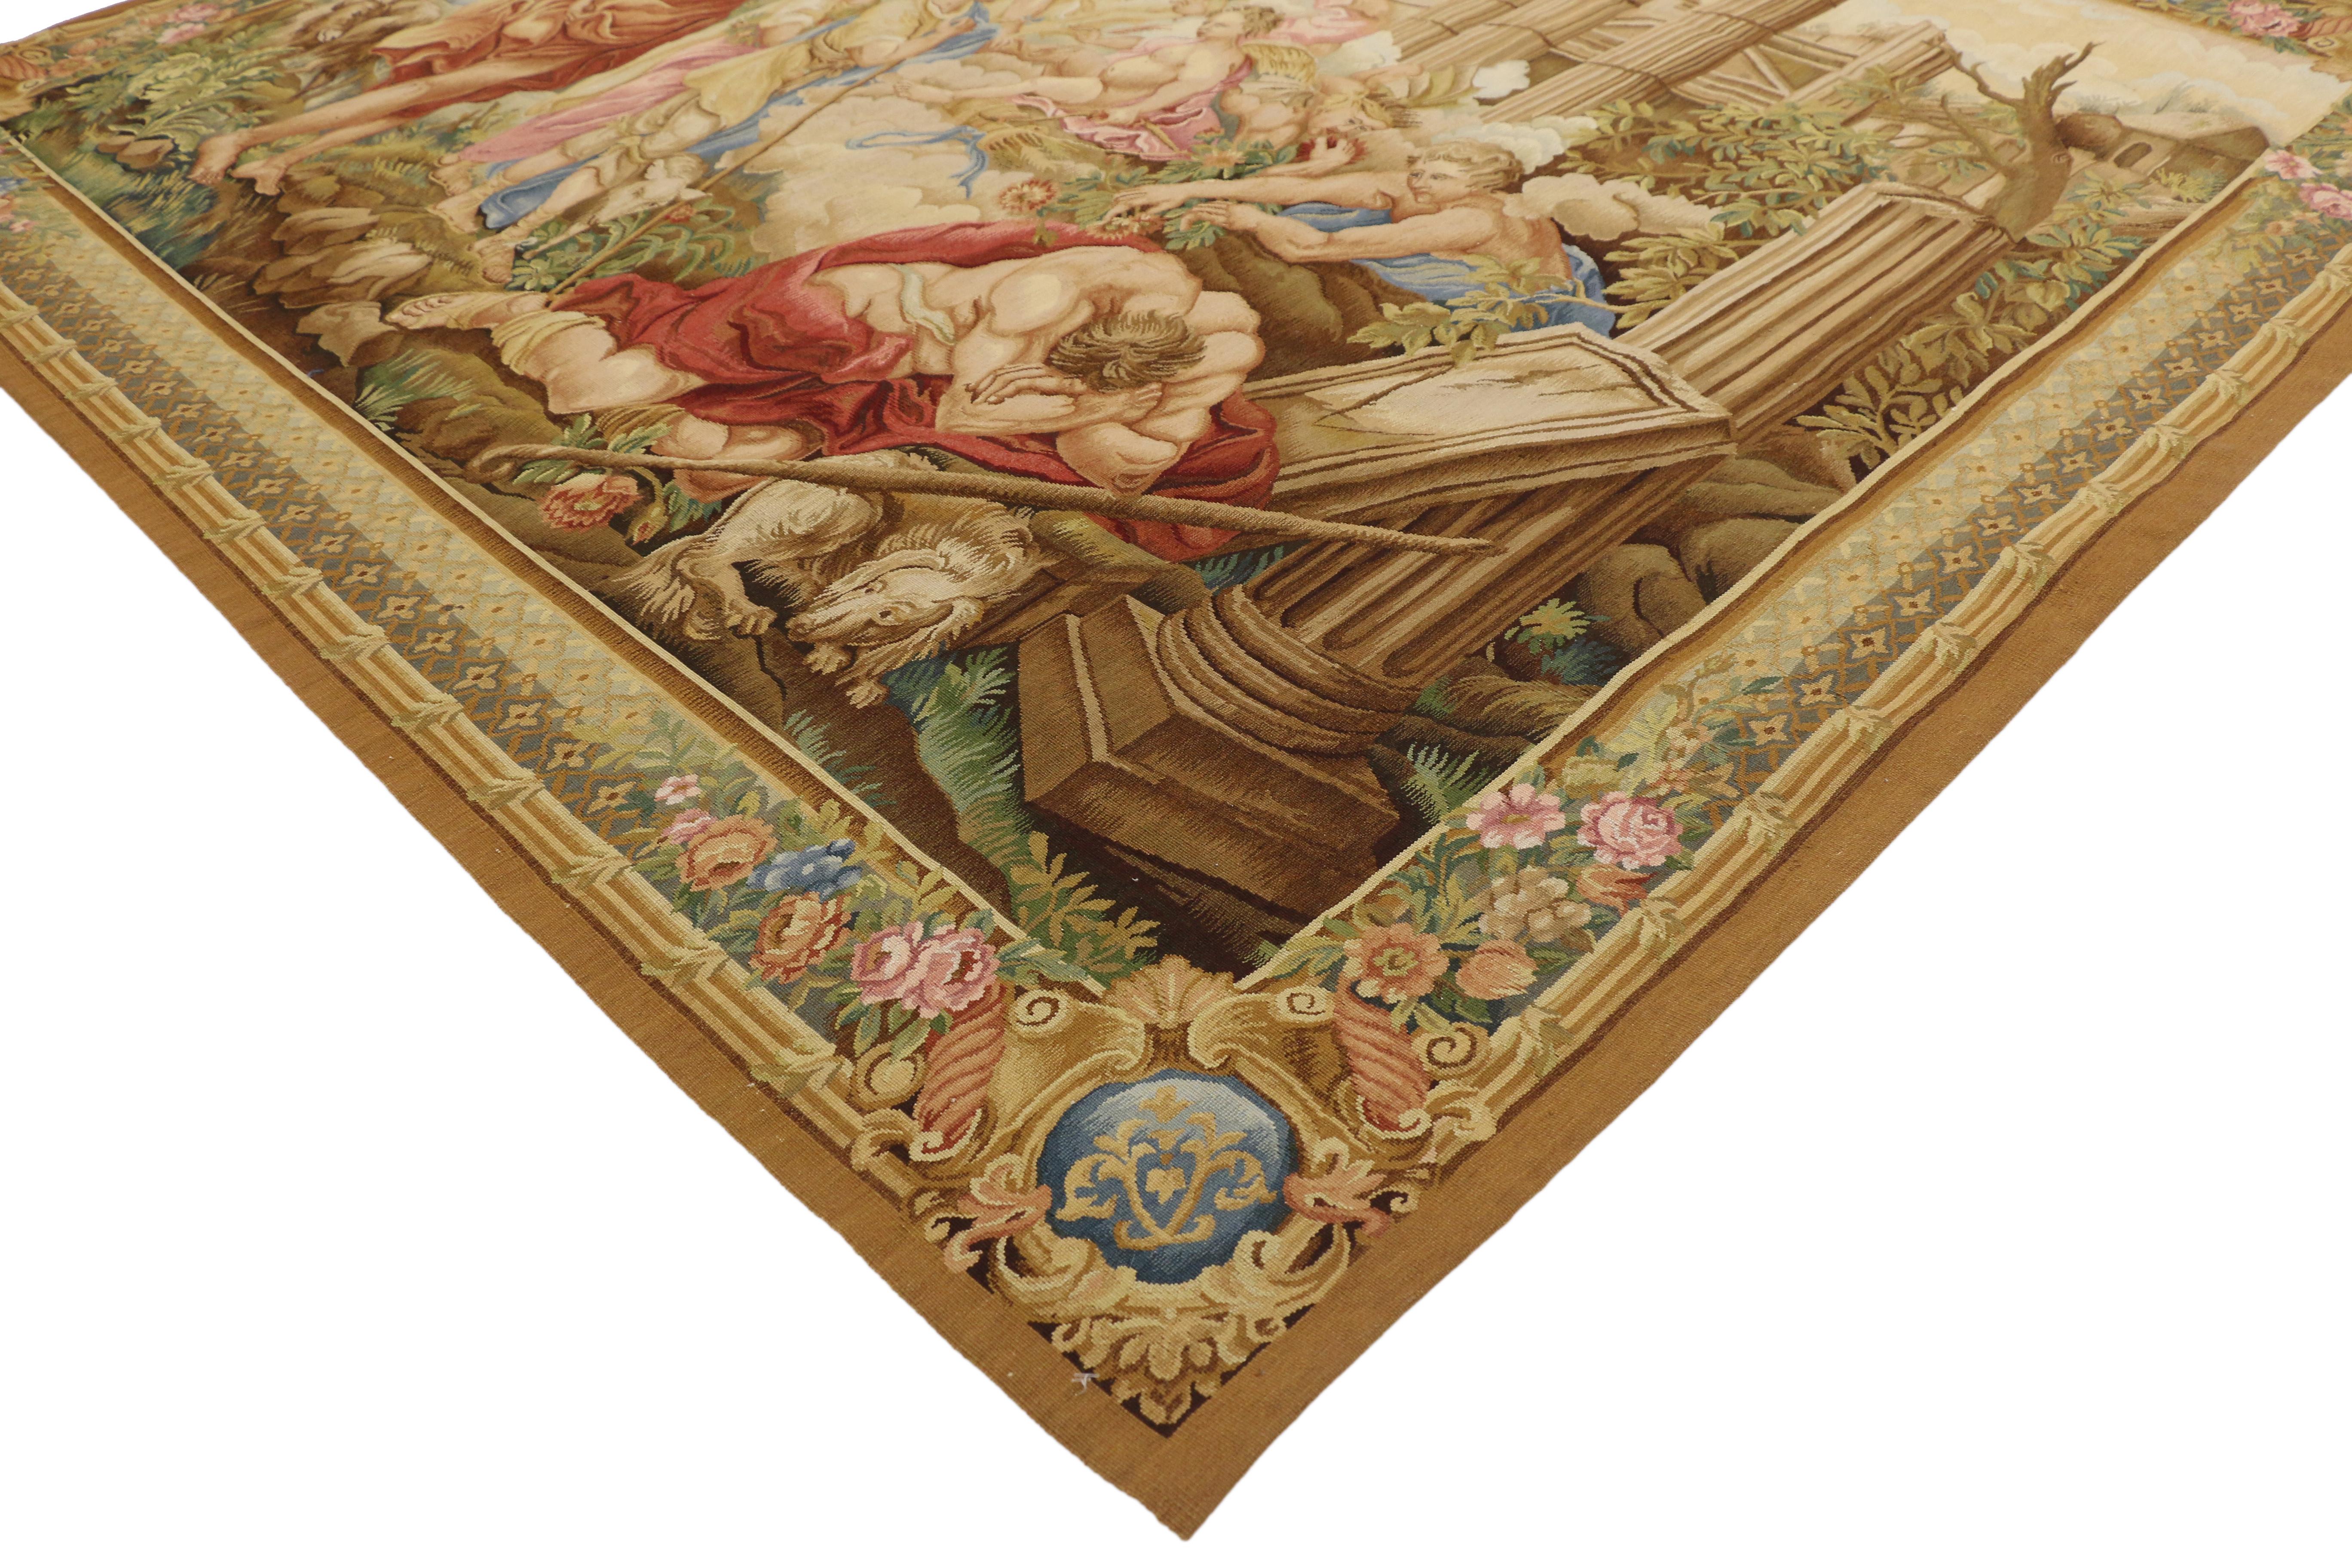 73691 Louis XVI French Rococo Mythology Style Beauvais Tapestry after Francois Boucher 05'05 x 06'05. This Louis XVI Beauvais style tapestry depicts a mythological scene inspired by Charles Le Brun, and Francois Boucher, the story of Psyche. In each